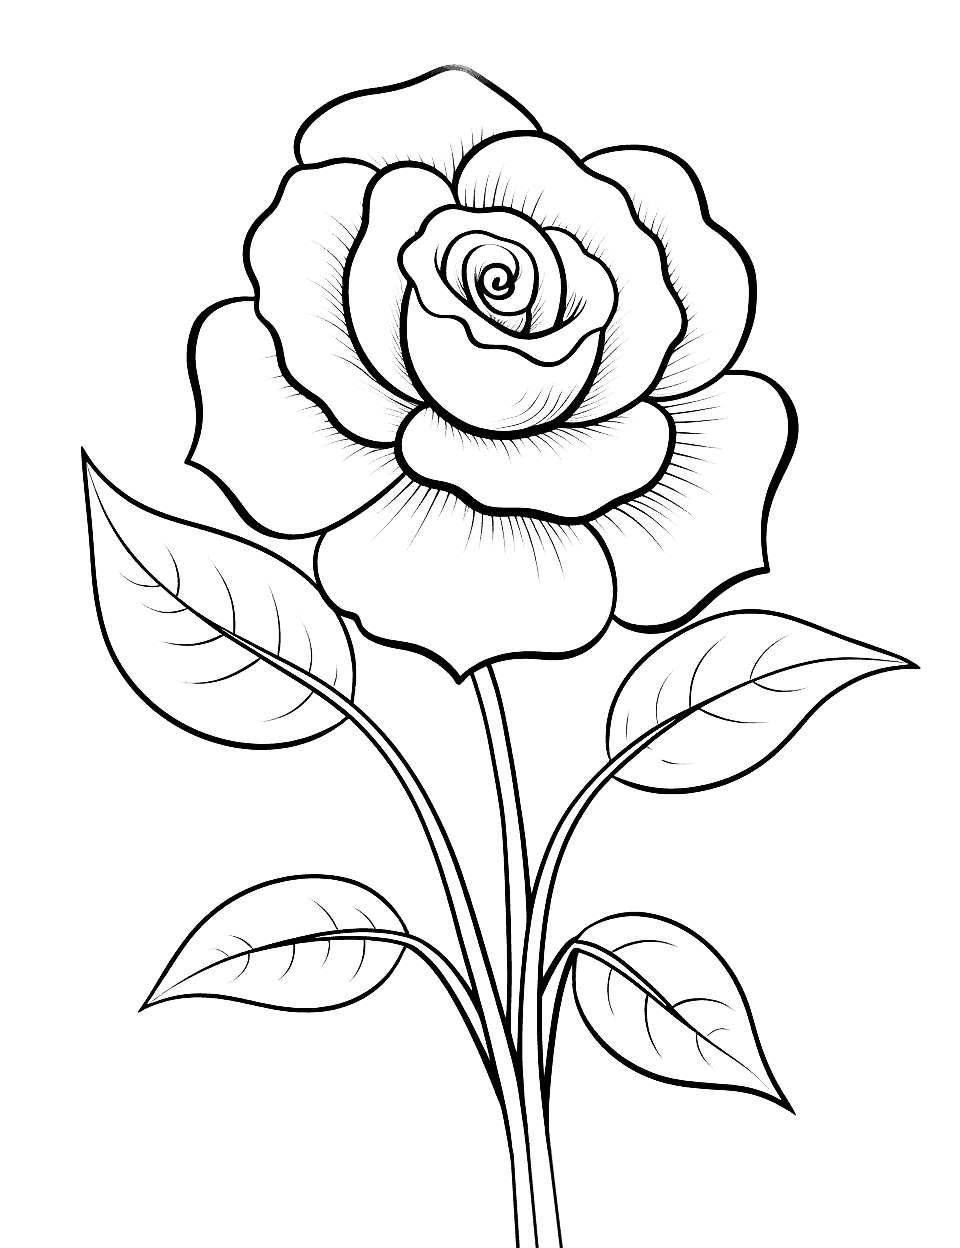 Pretty Rose Drawing Flower Coloring Page - A pretty, detailed drawing of a rose to color.